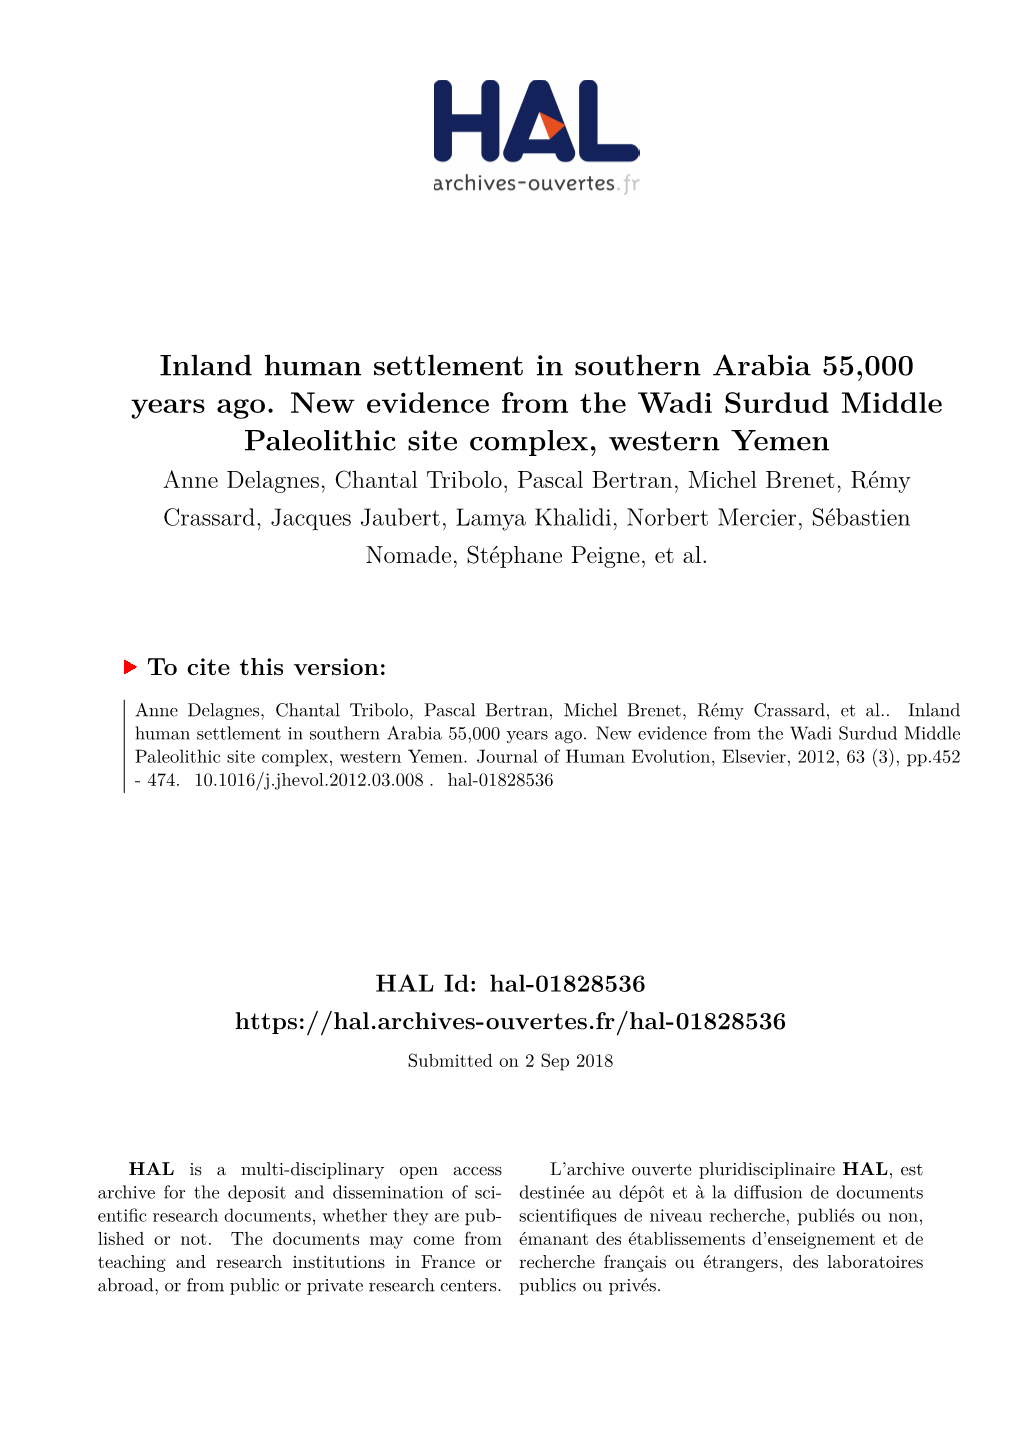 Inland Human Settlement in Southern Arabia 55,000 Years Ago. New Evidence from the Wadi Surdud Middle Paleolithic Site Complex